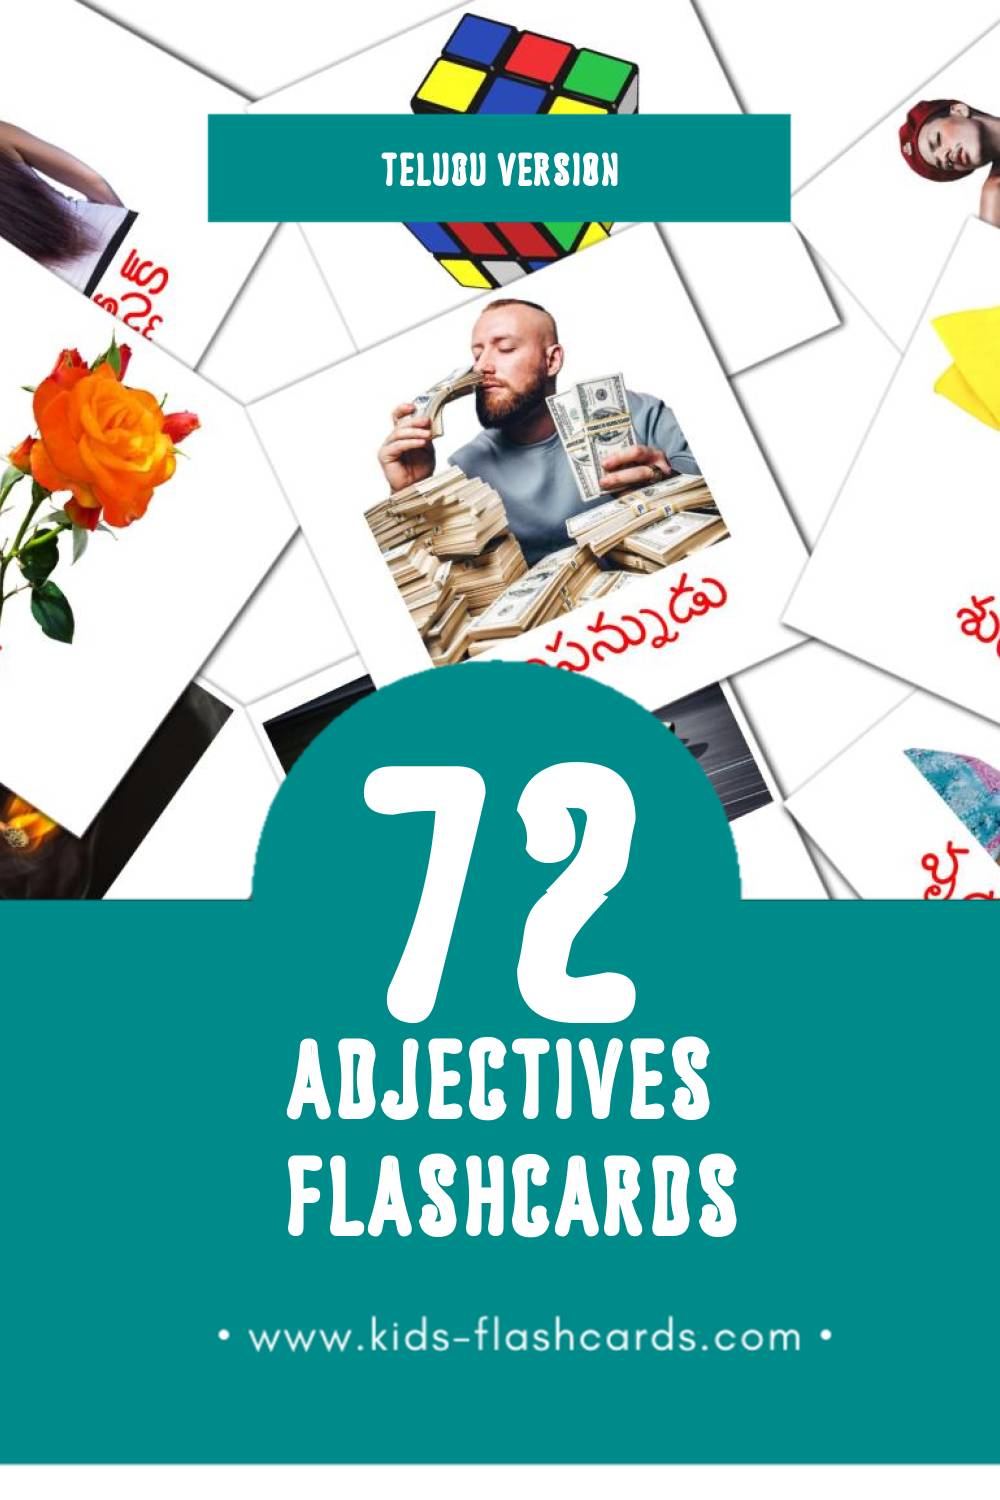 Visual విశేషణాలు Flashcards for Toddlers (72 cards in Telugu)